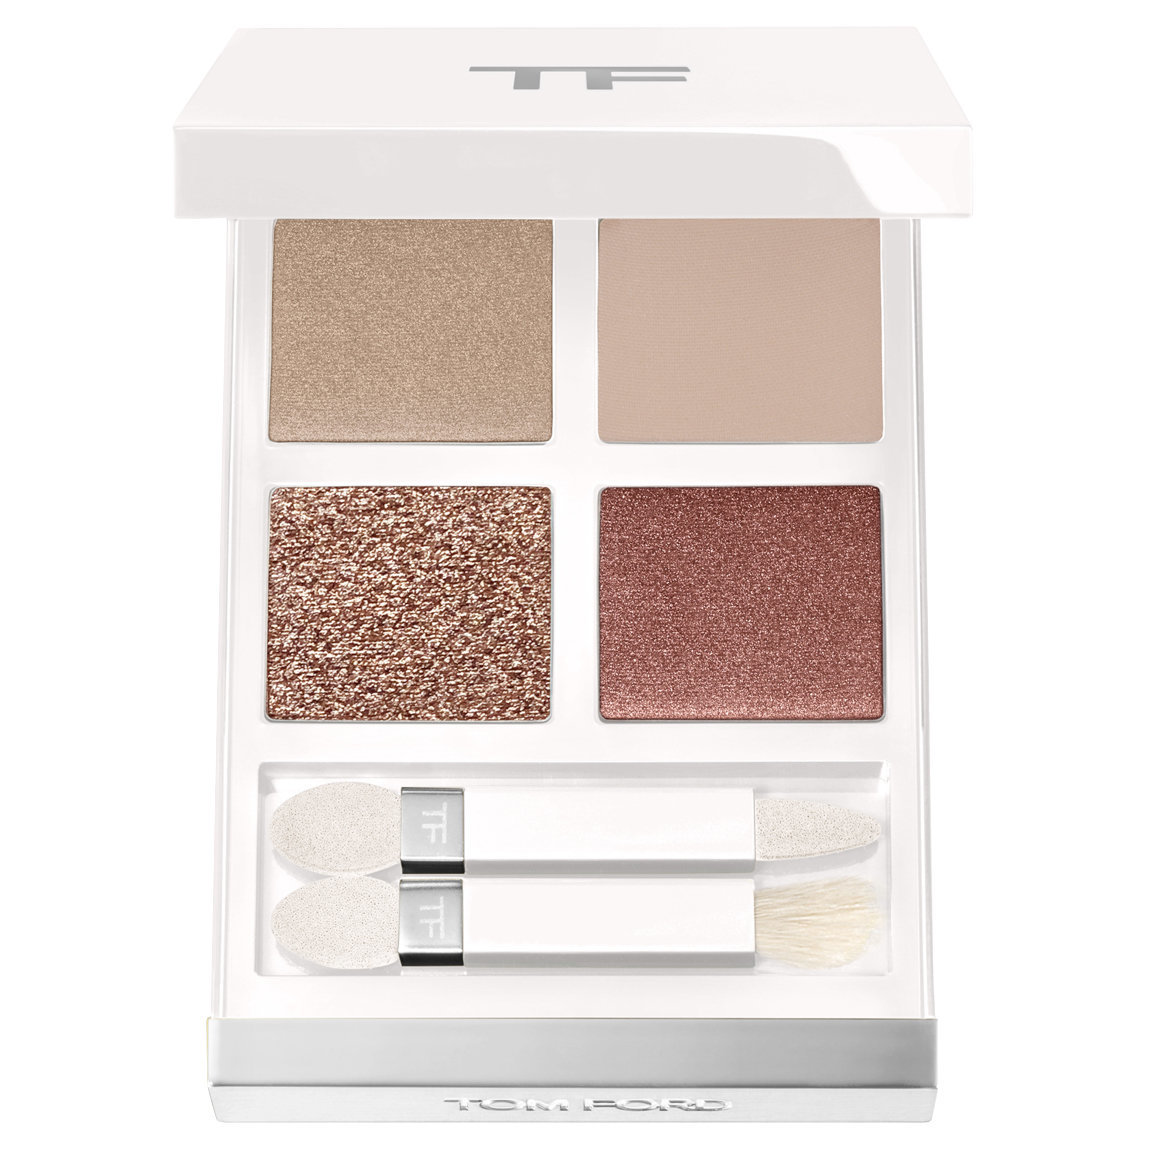 TOM FORD Soleil Neige Eye Color Quad alternative view 1 - product swatch.